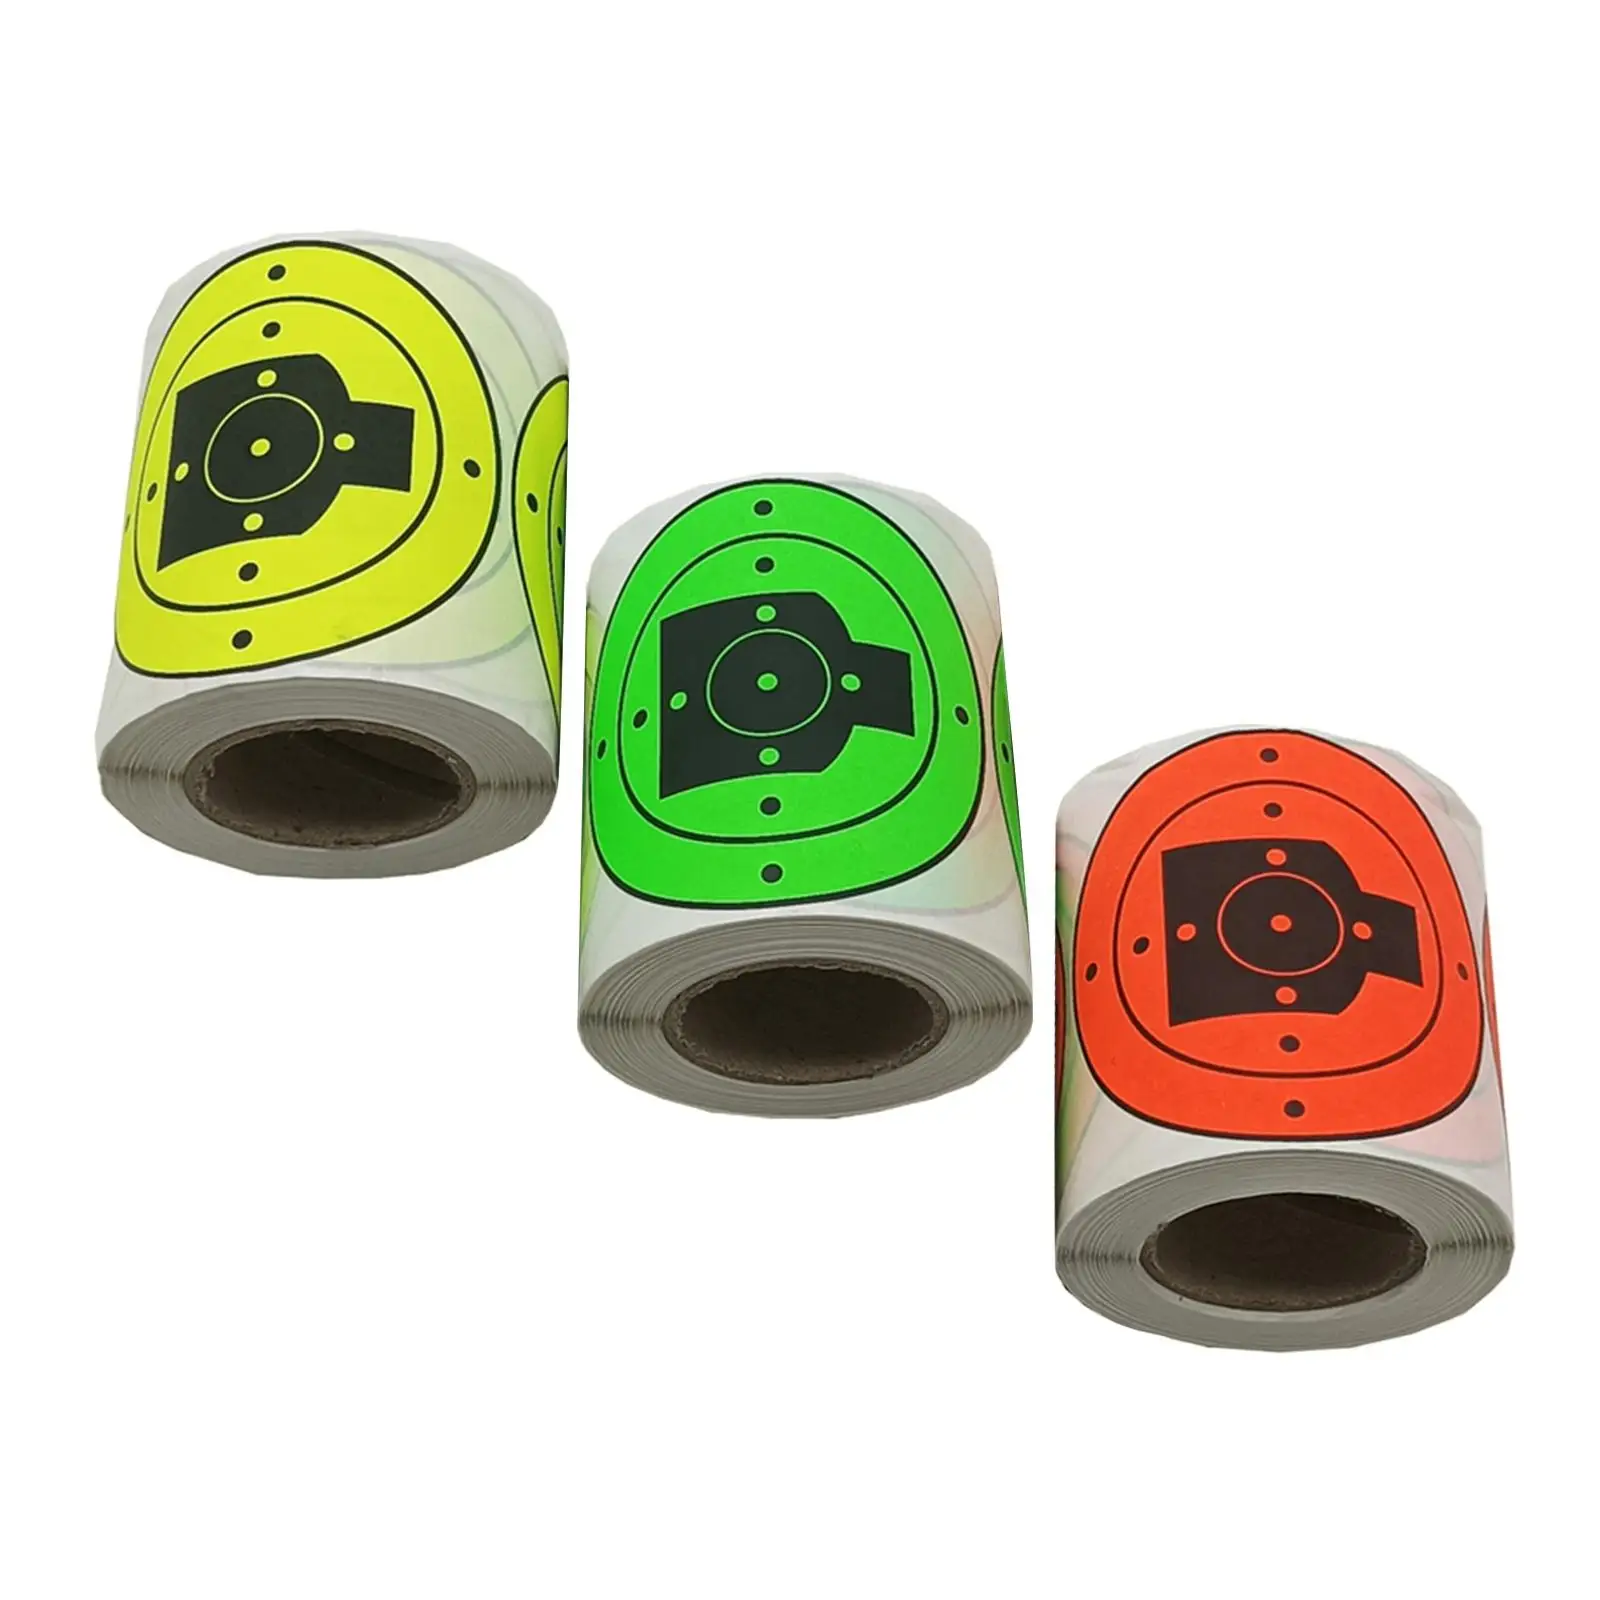 200Pcs Shooting Targets 3`` Adhesive Stickers Fluorescence Paper Targets High Visibility Hunting Targets Accessories